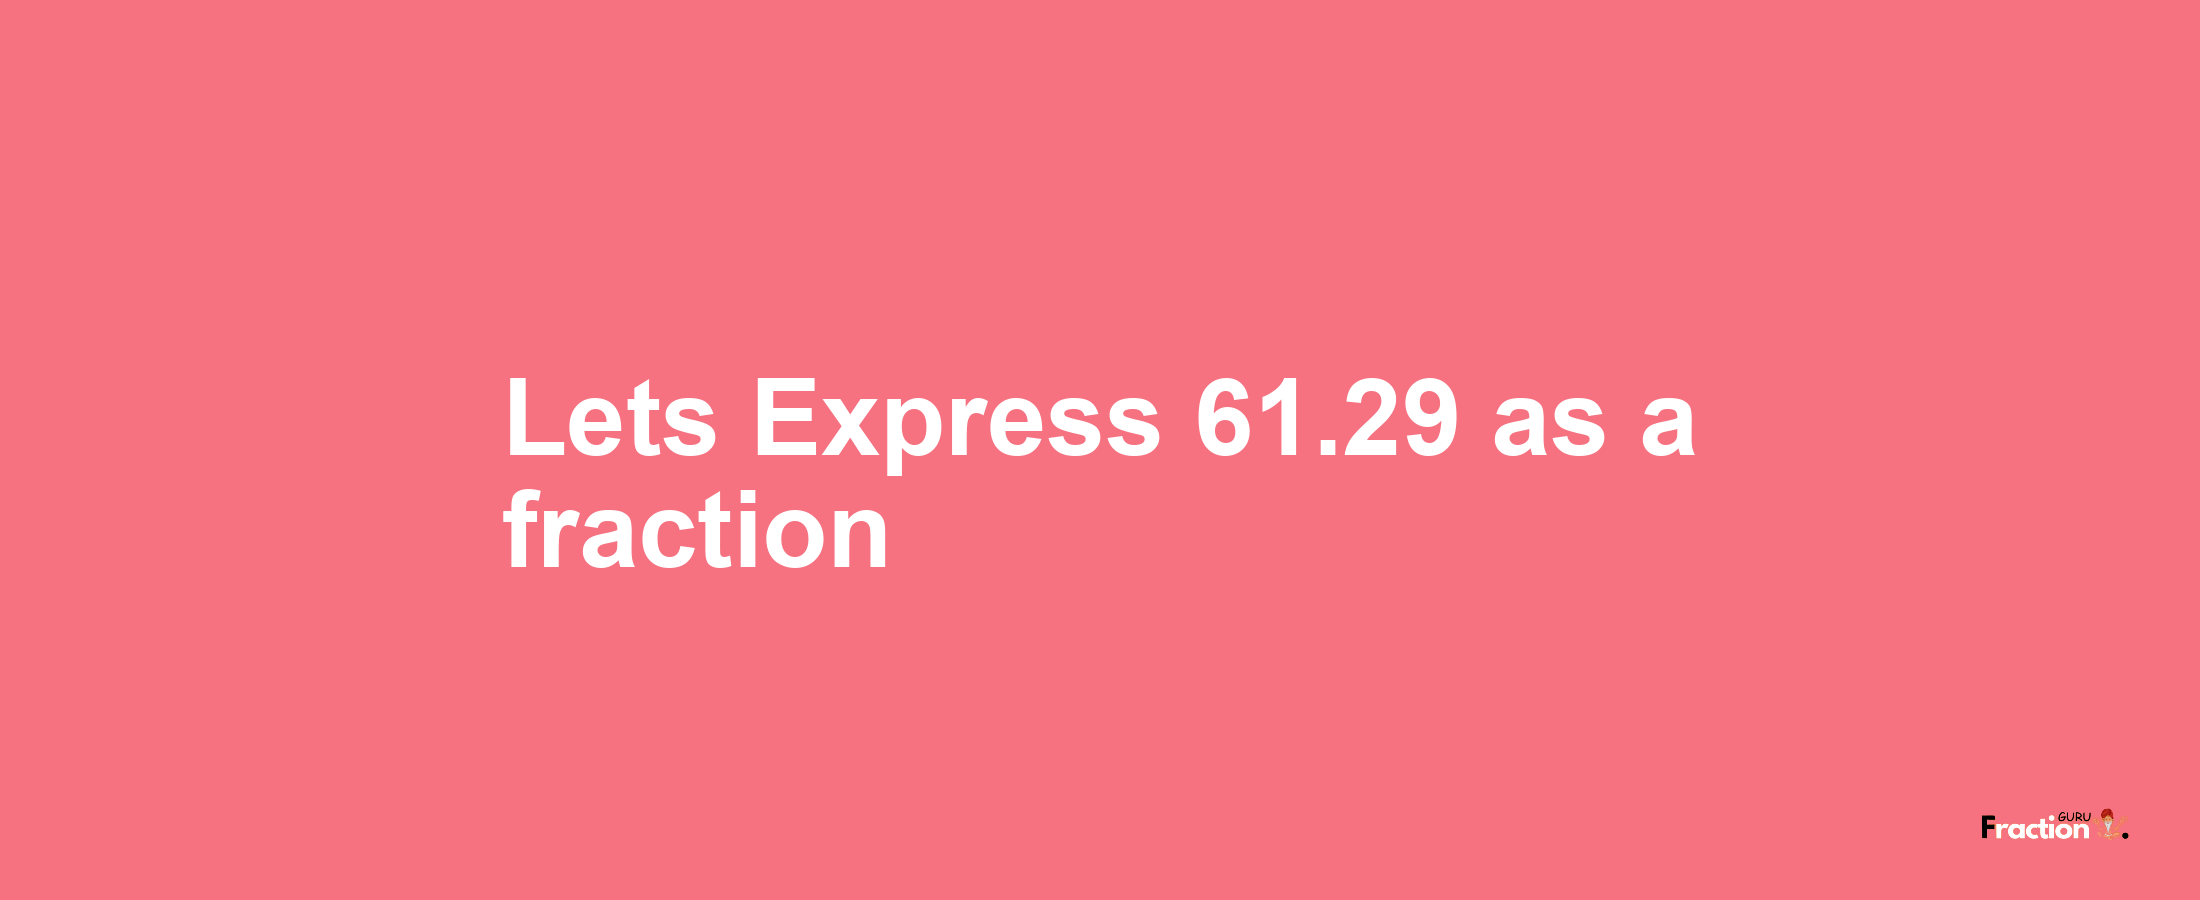 Lets Express 61.29 as afraction